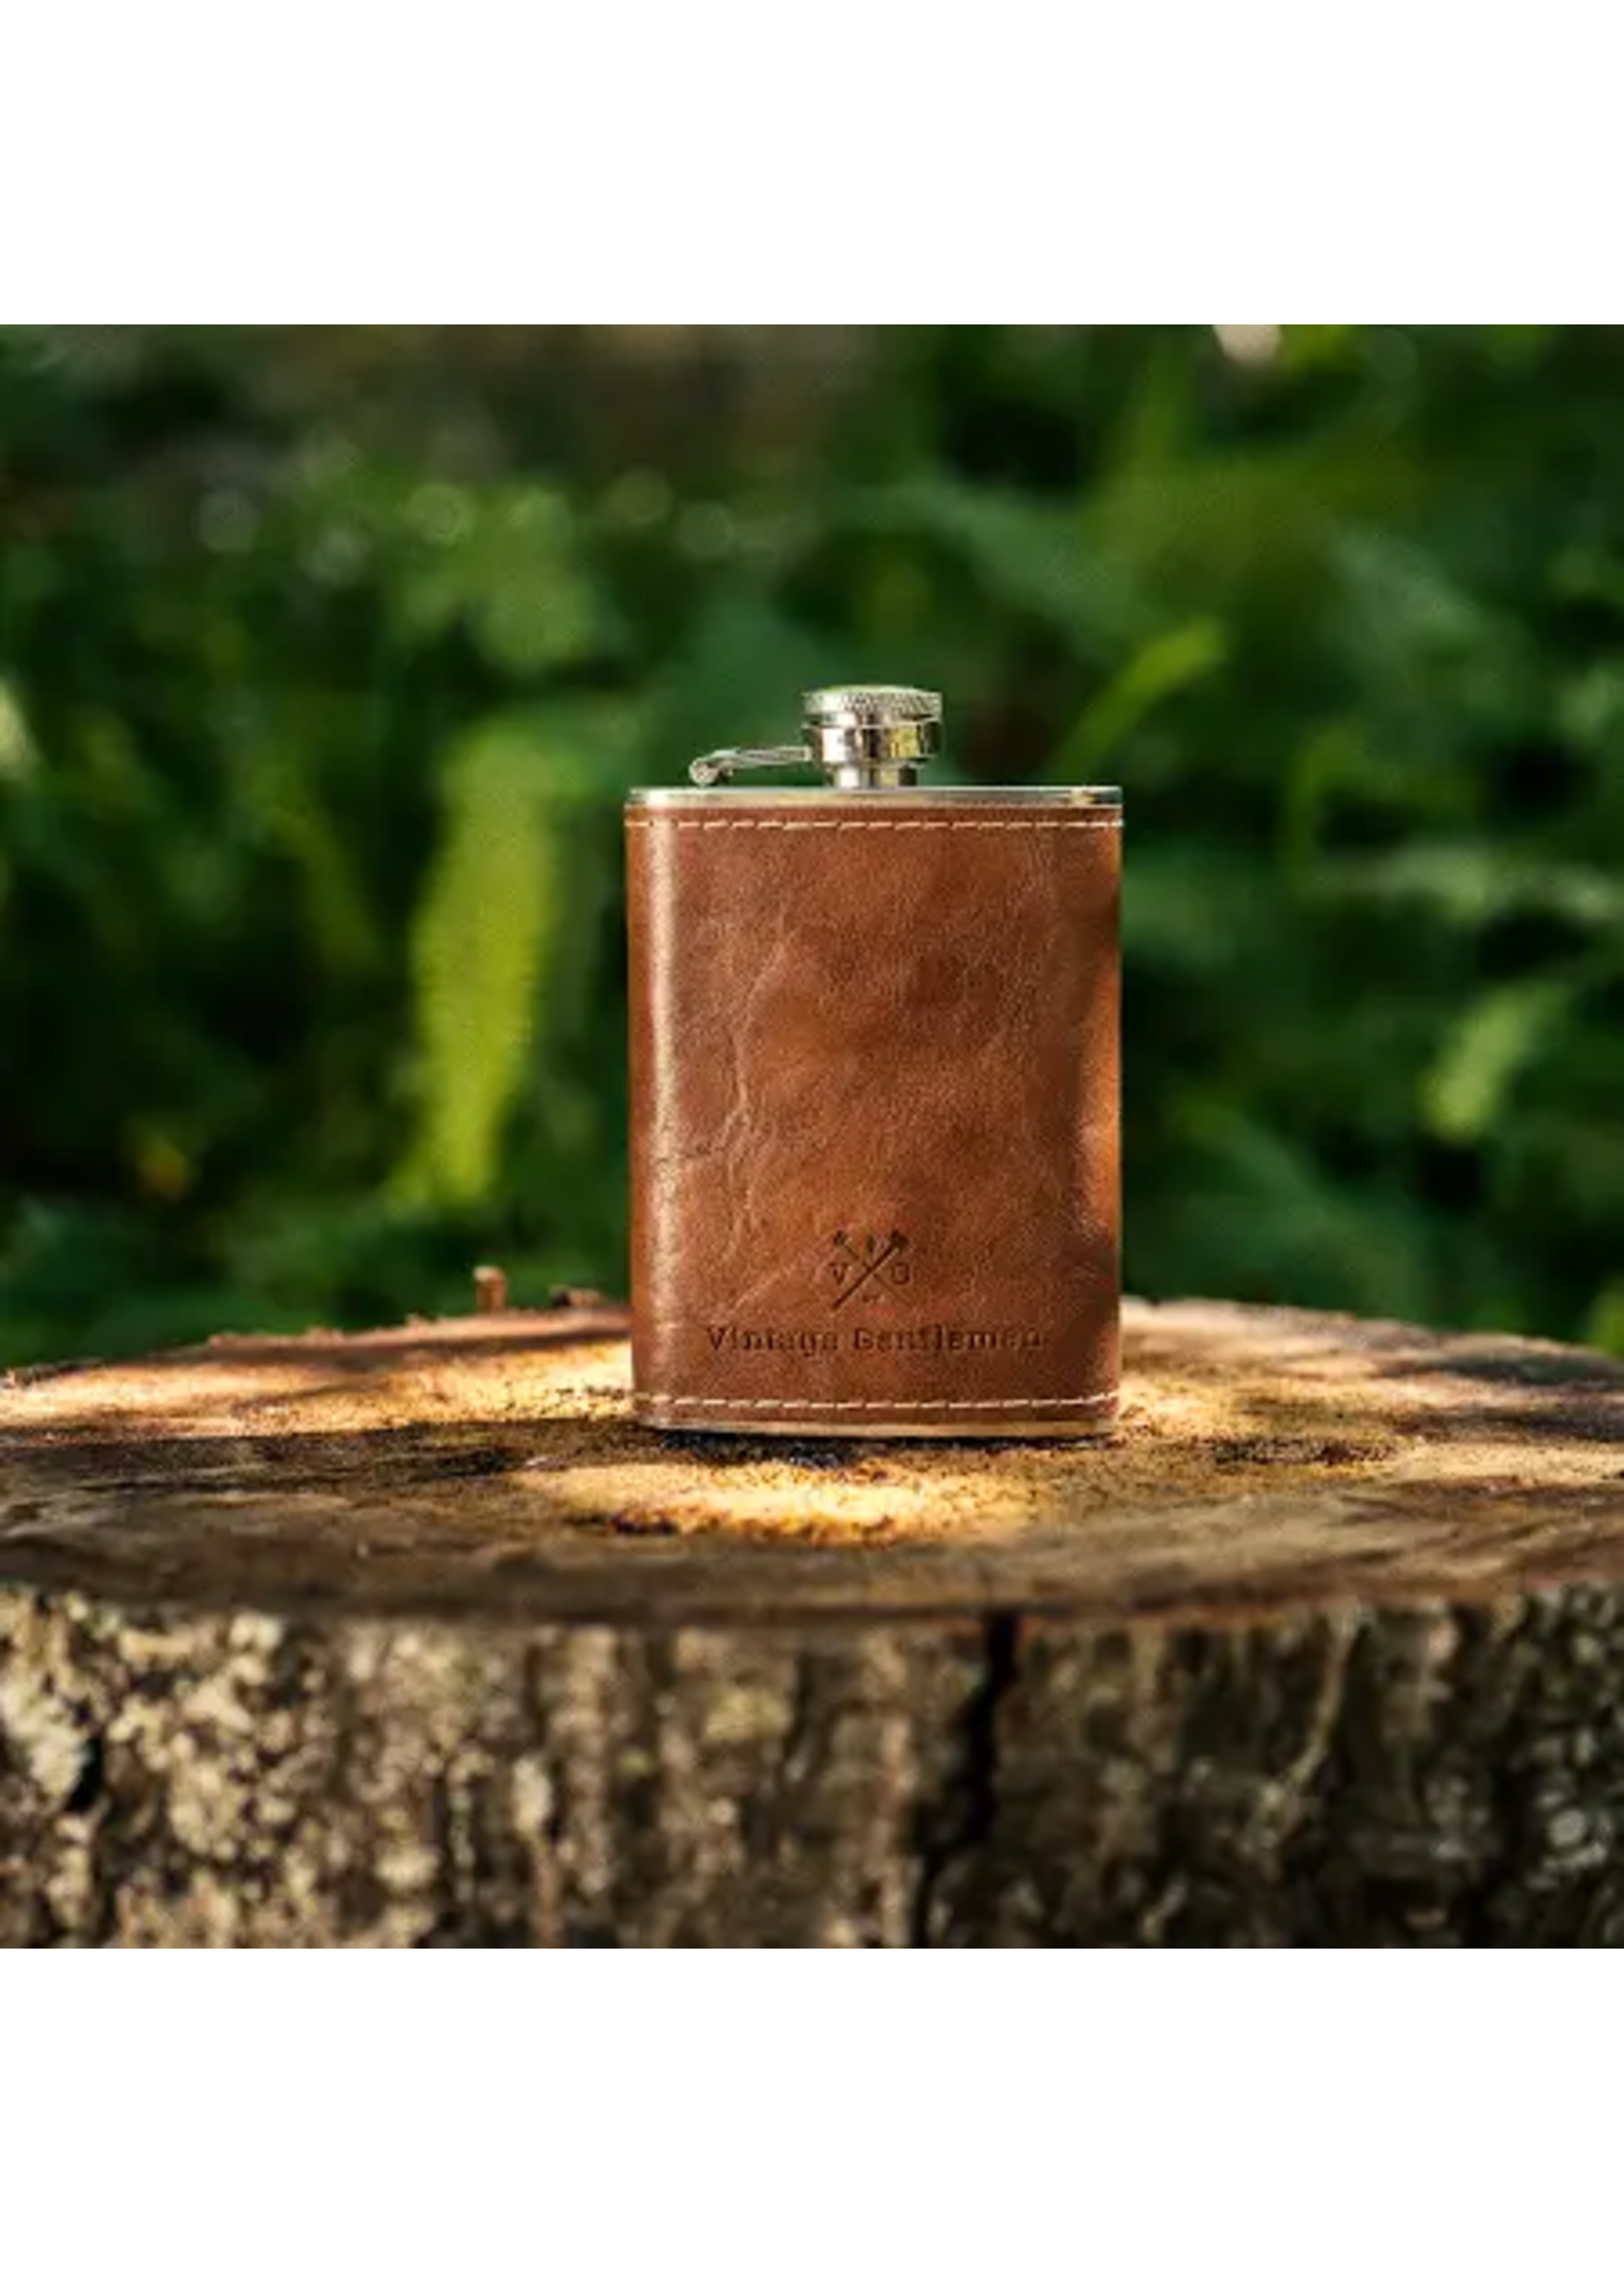 Vintage Gentleman Leather Wrapped VG Stainless Steel Flask